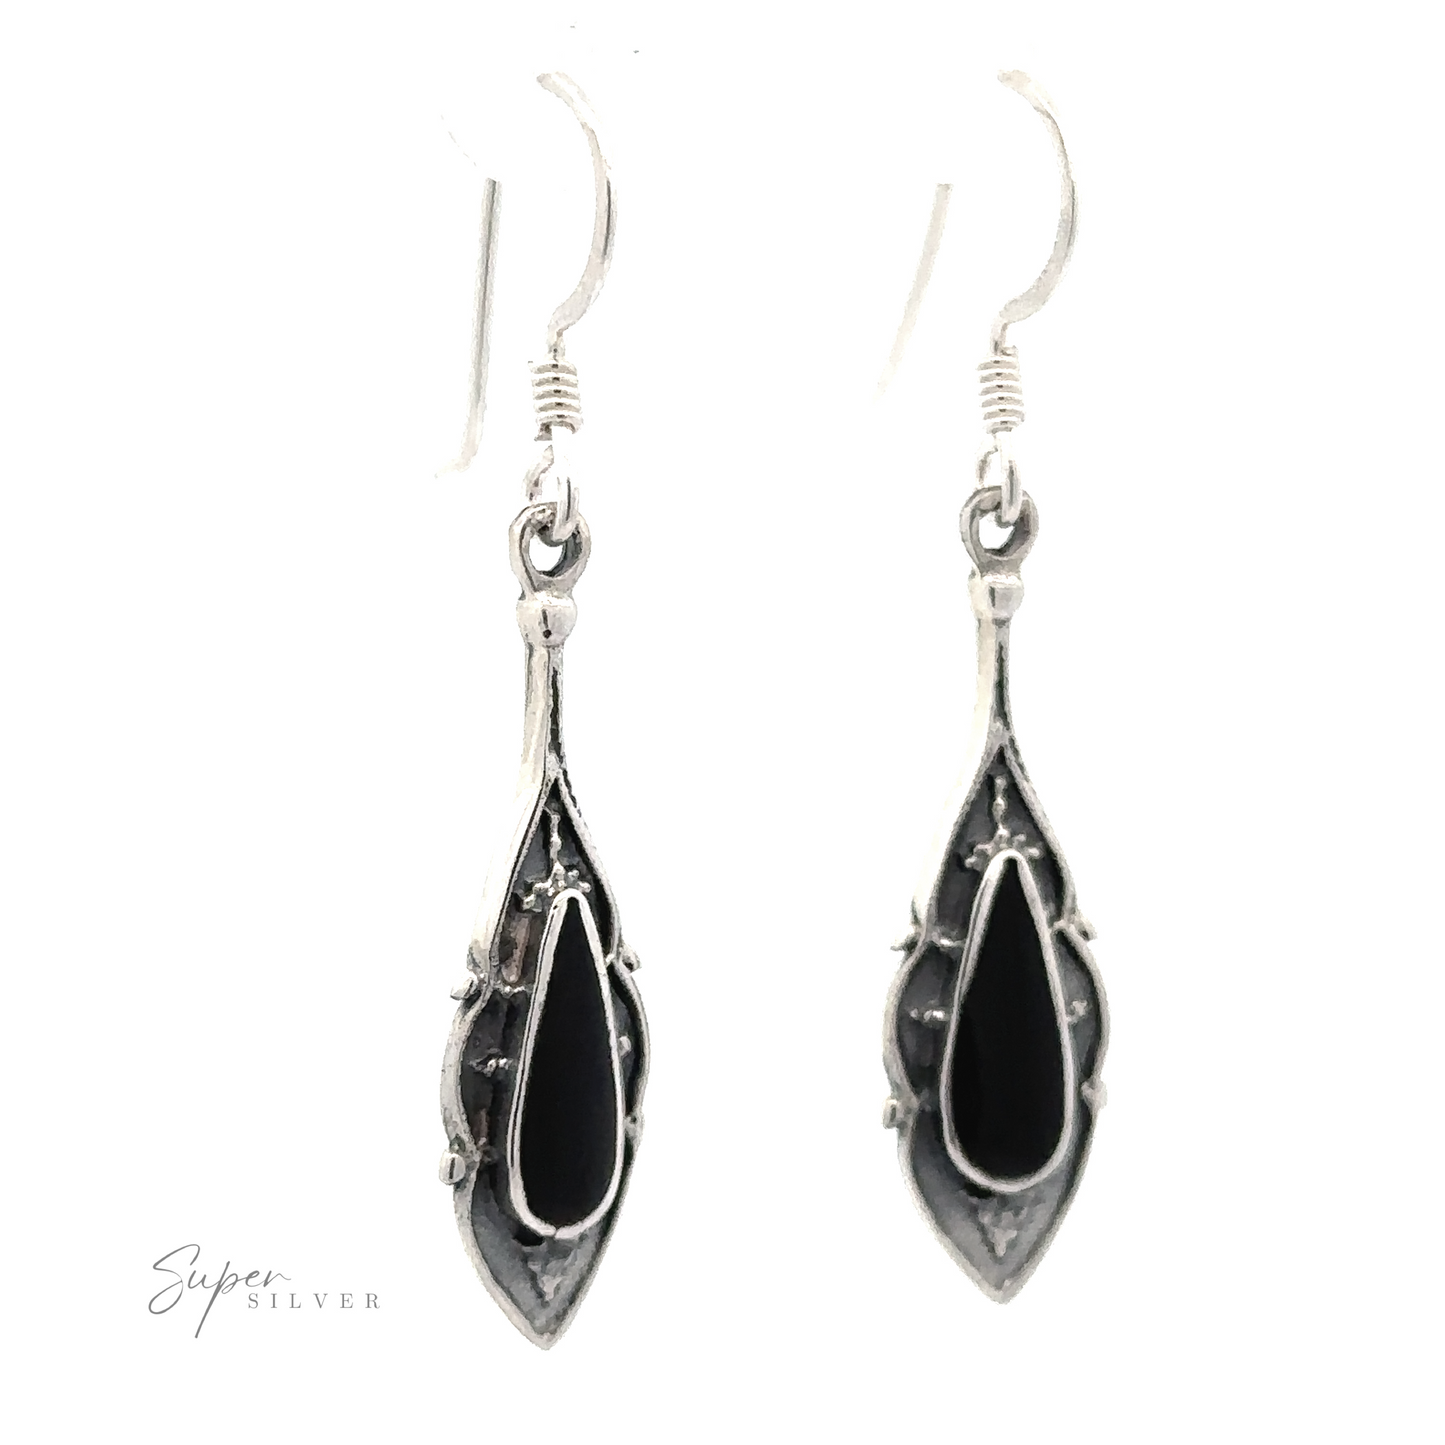 
                  
                    A pair of Teardrop Shape Inlaid Earrings with black, teardrop-shaped accents, featuring hooks for insertion. The image has a "Super Silver" logo on the bottom left.
                  
                